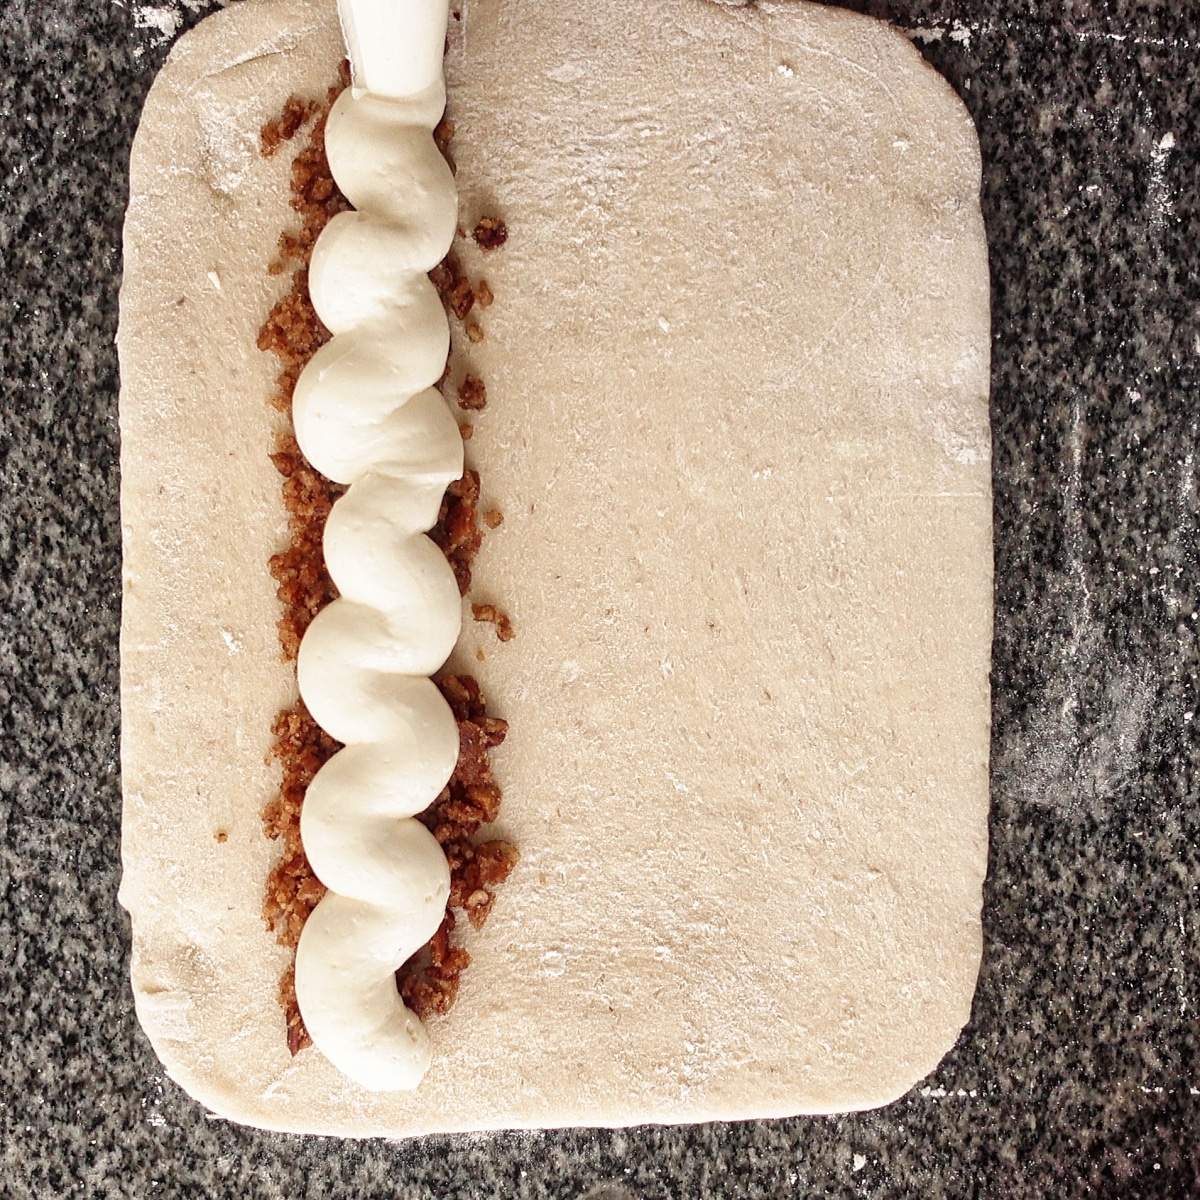 piping the cream cheese filling on top of the praline filling on the rectangle of dough.